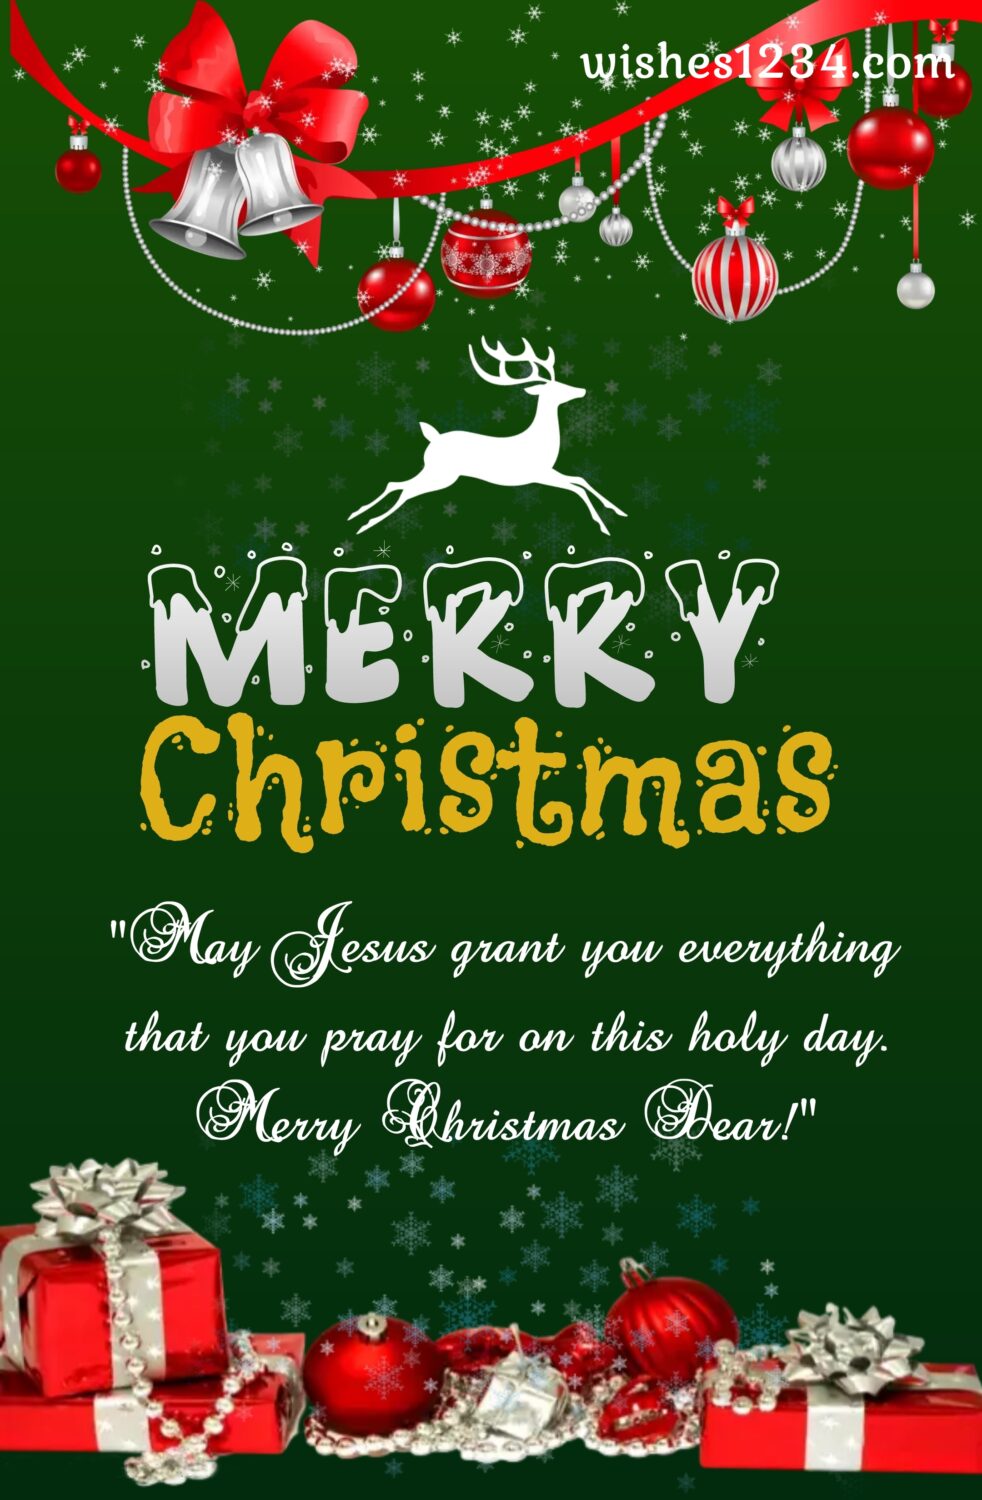 Christmas bells with gift and deer running, Merry Christmas Quotes & short wishes.